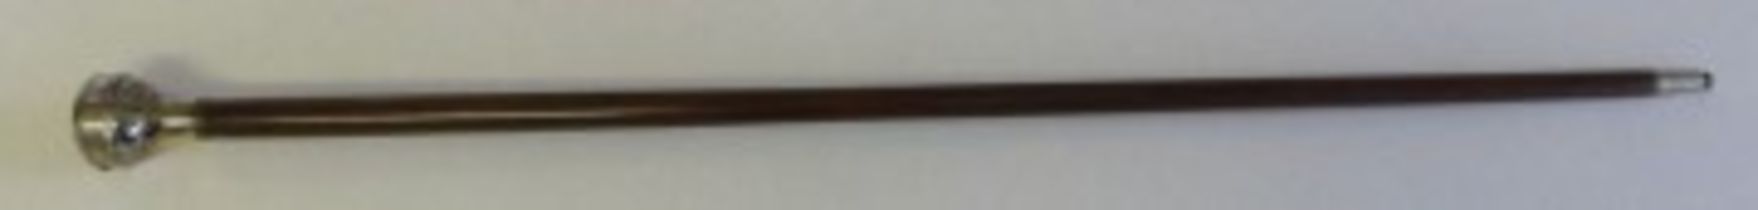 The handle of this stick is of nickel plated brass; the cap of which hinges open to reveal a compass